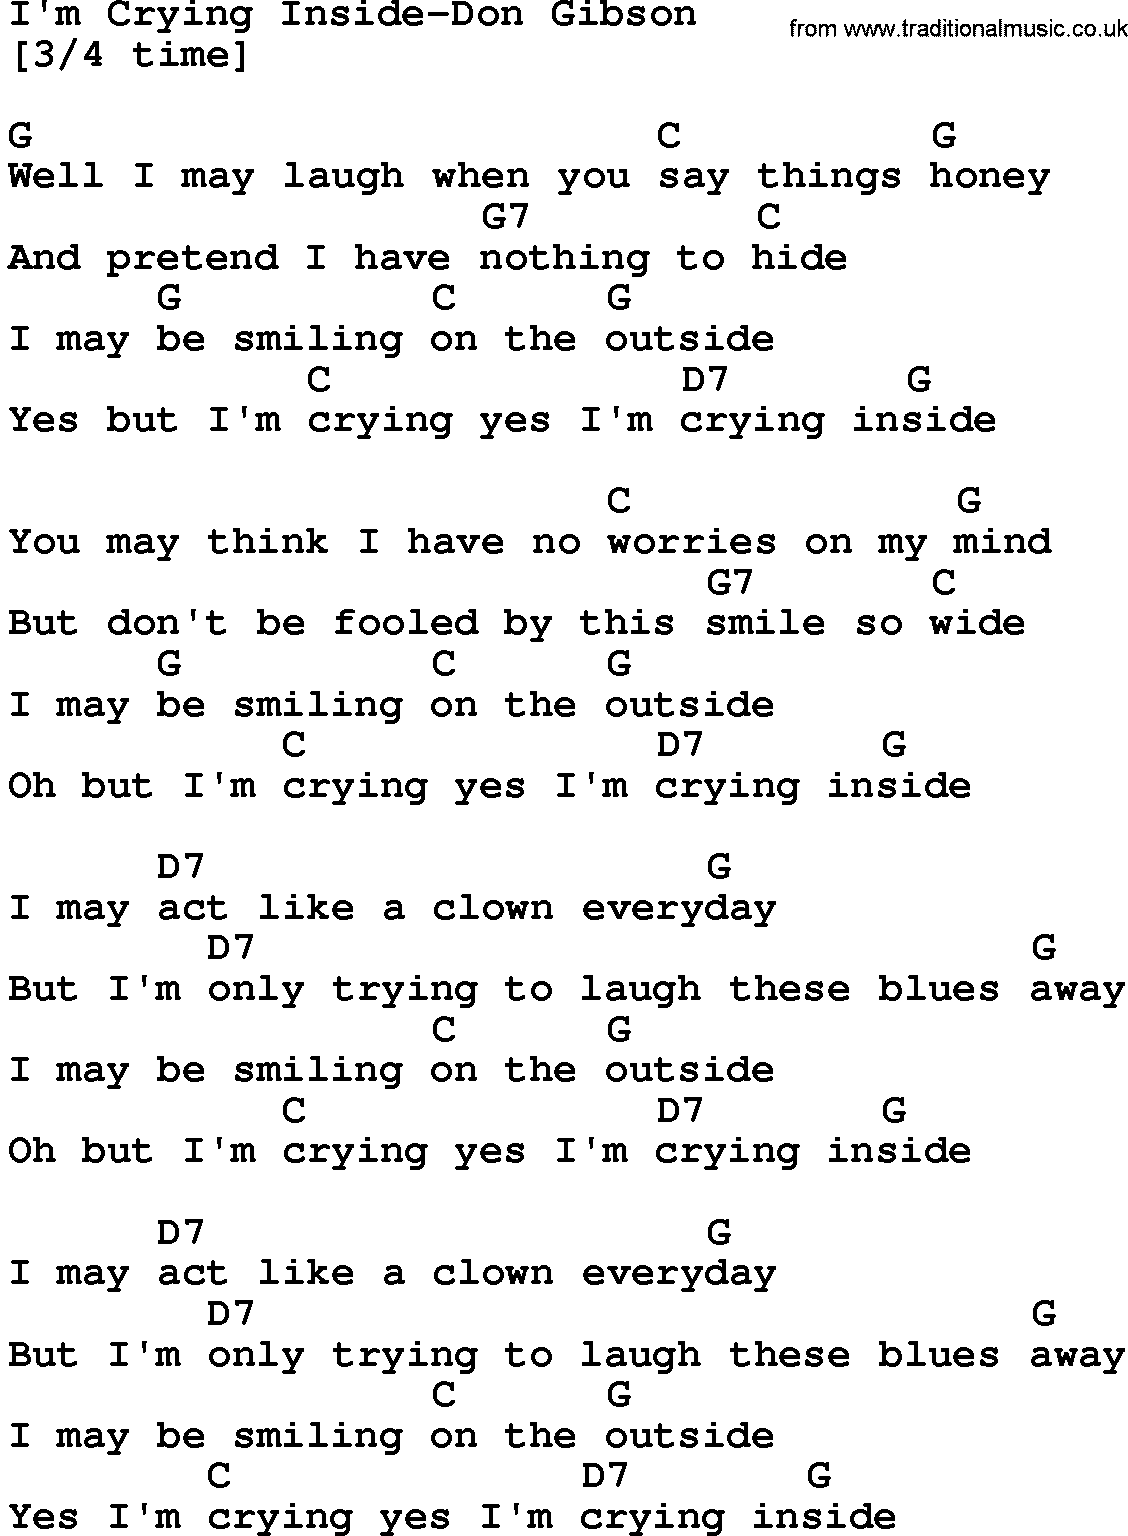 Country music song: I'm Crying Inside-Don Gibson lyrics and chords